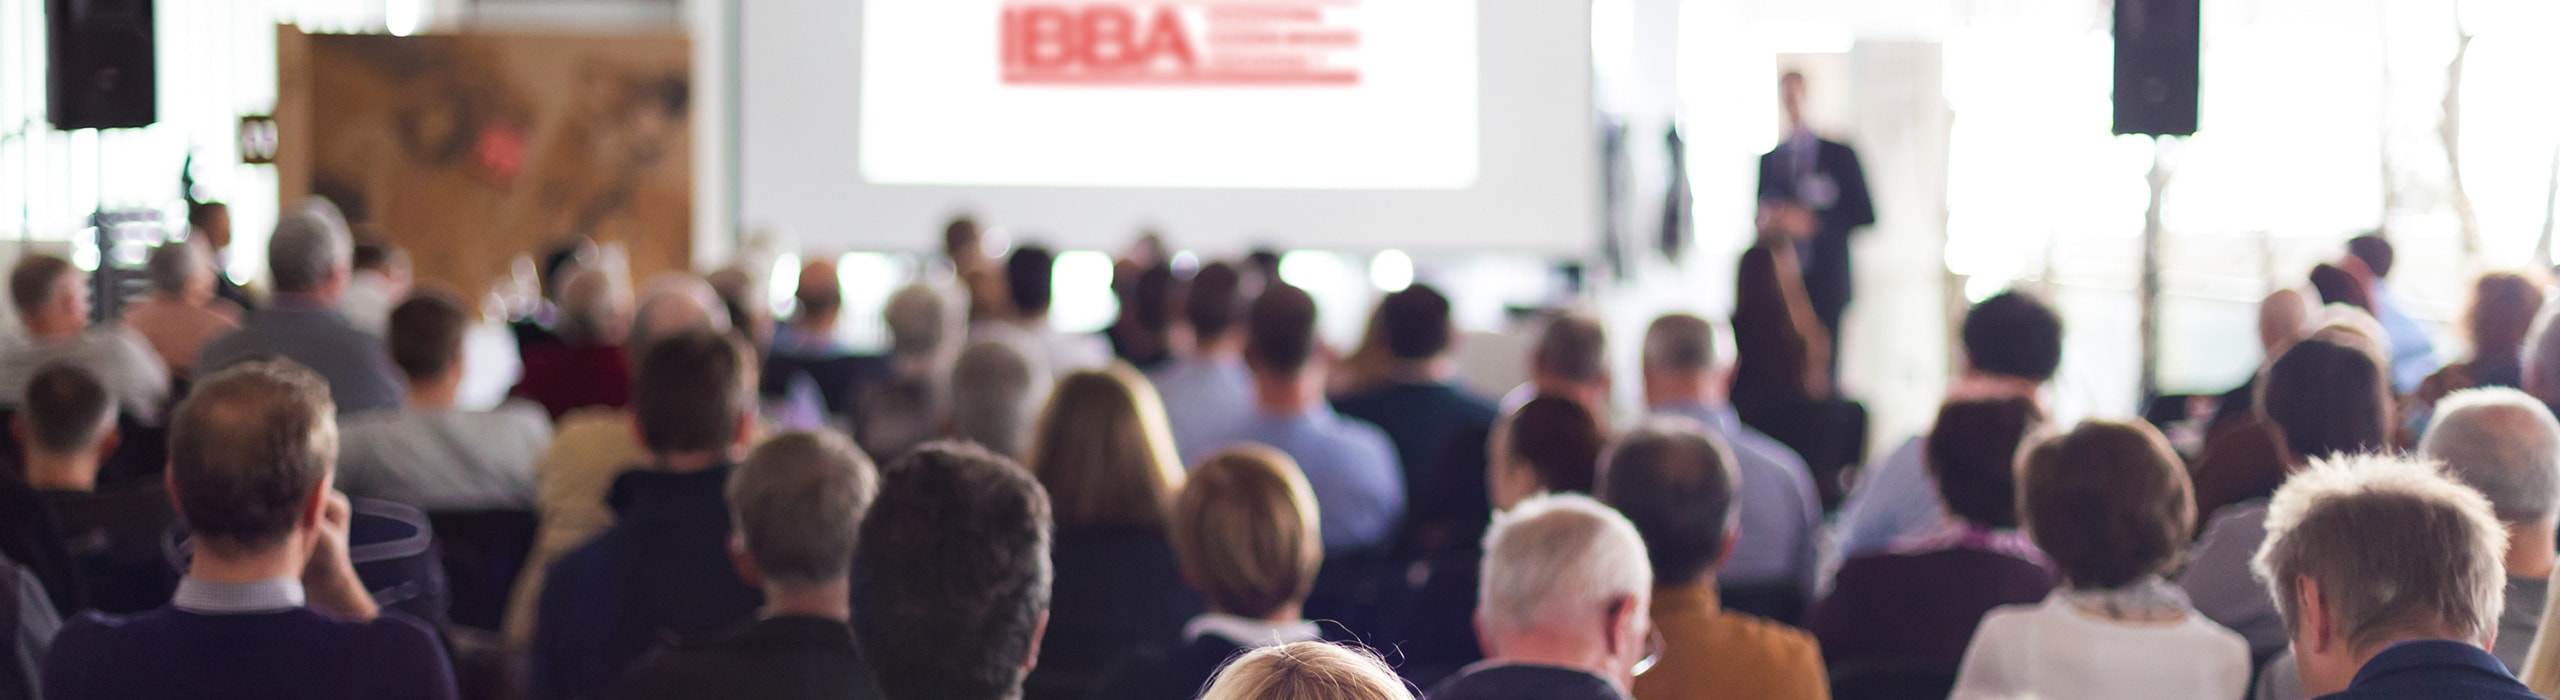 Find Business Broker Events Near You | IBBA Conferences & Summits